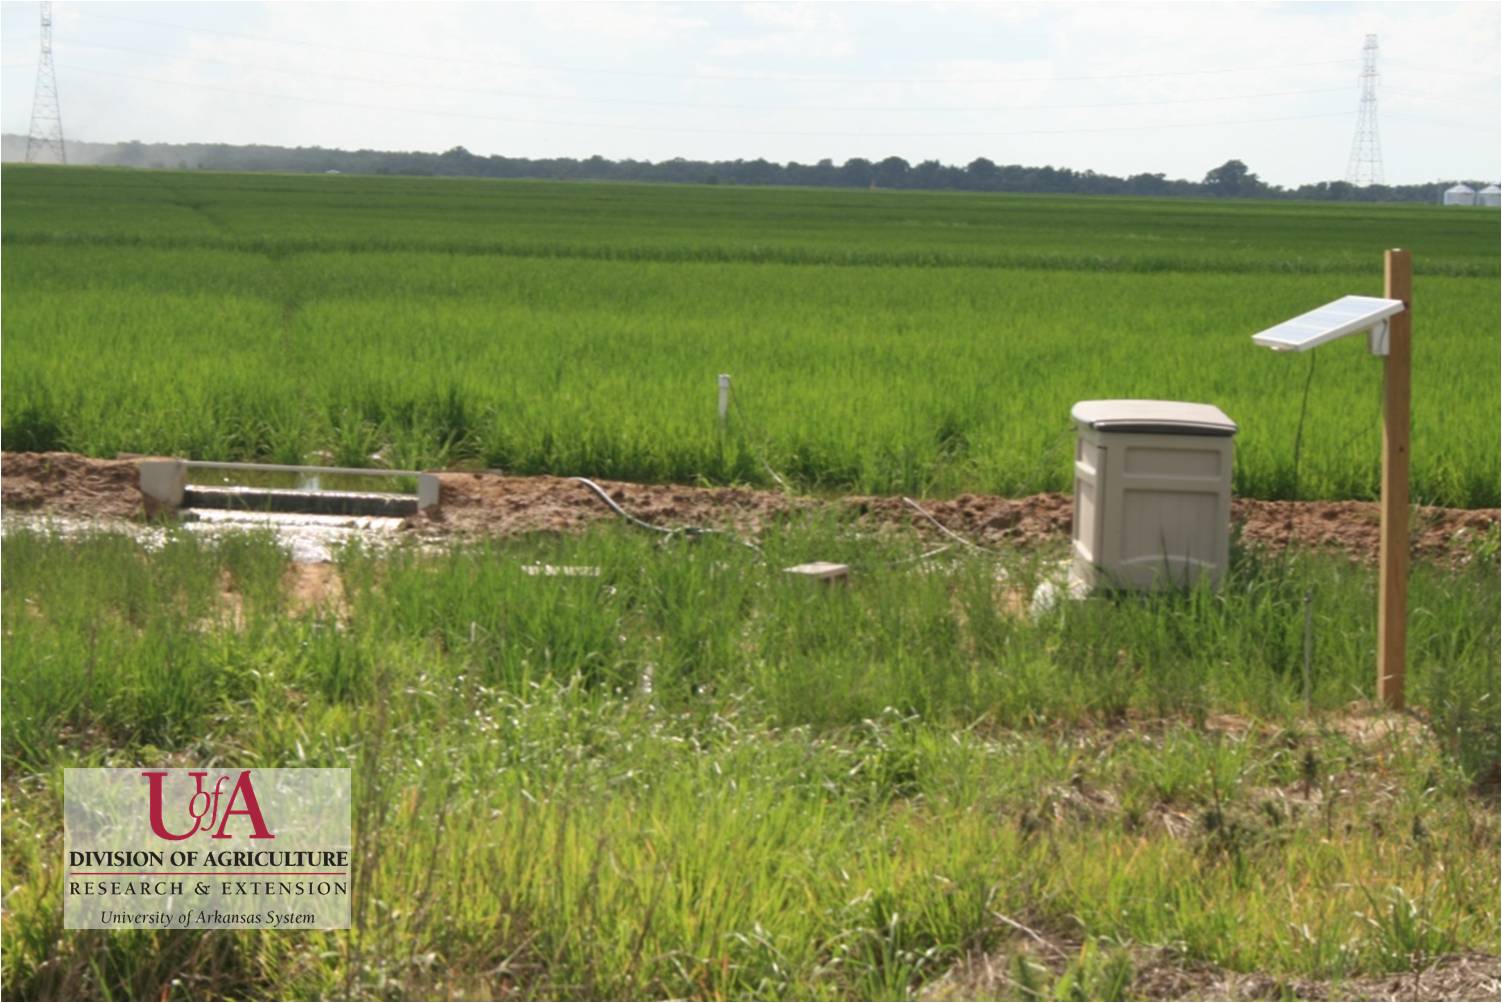 Edge-of-Field-Monitoring can be used to Evaluate On-Farm Pollution Reduction Strategies